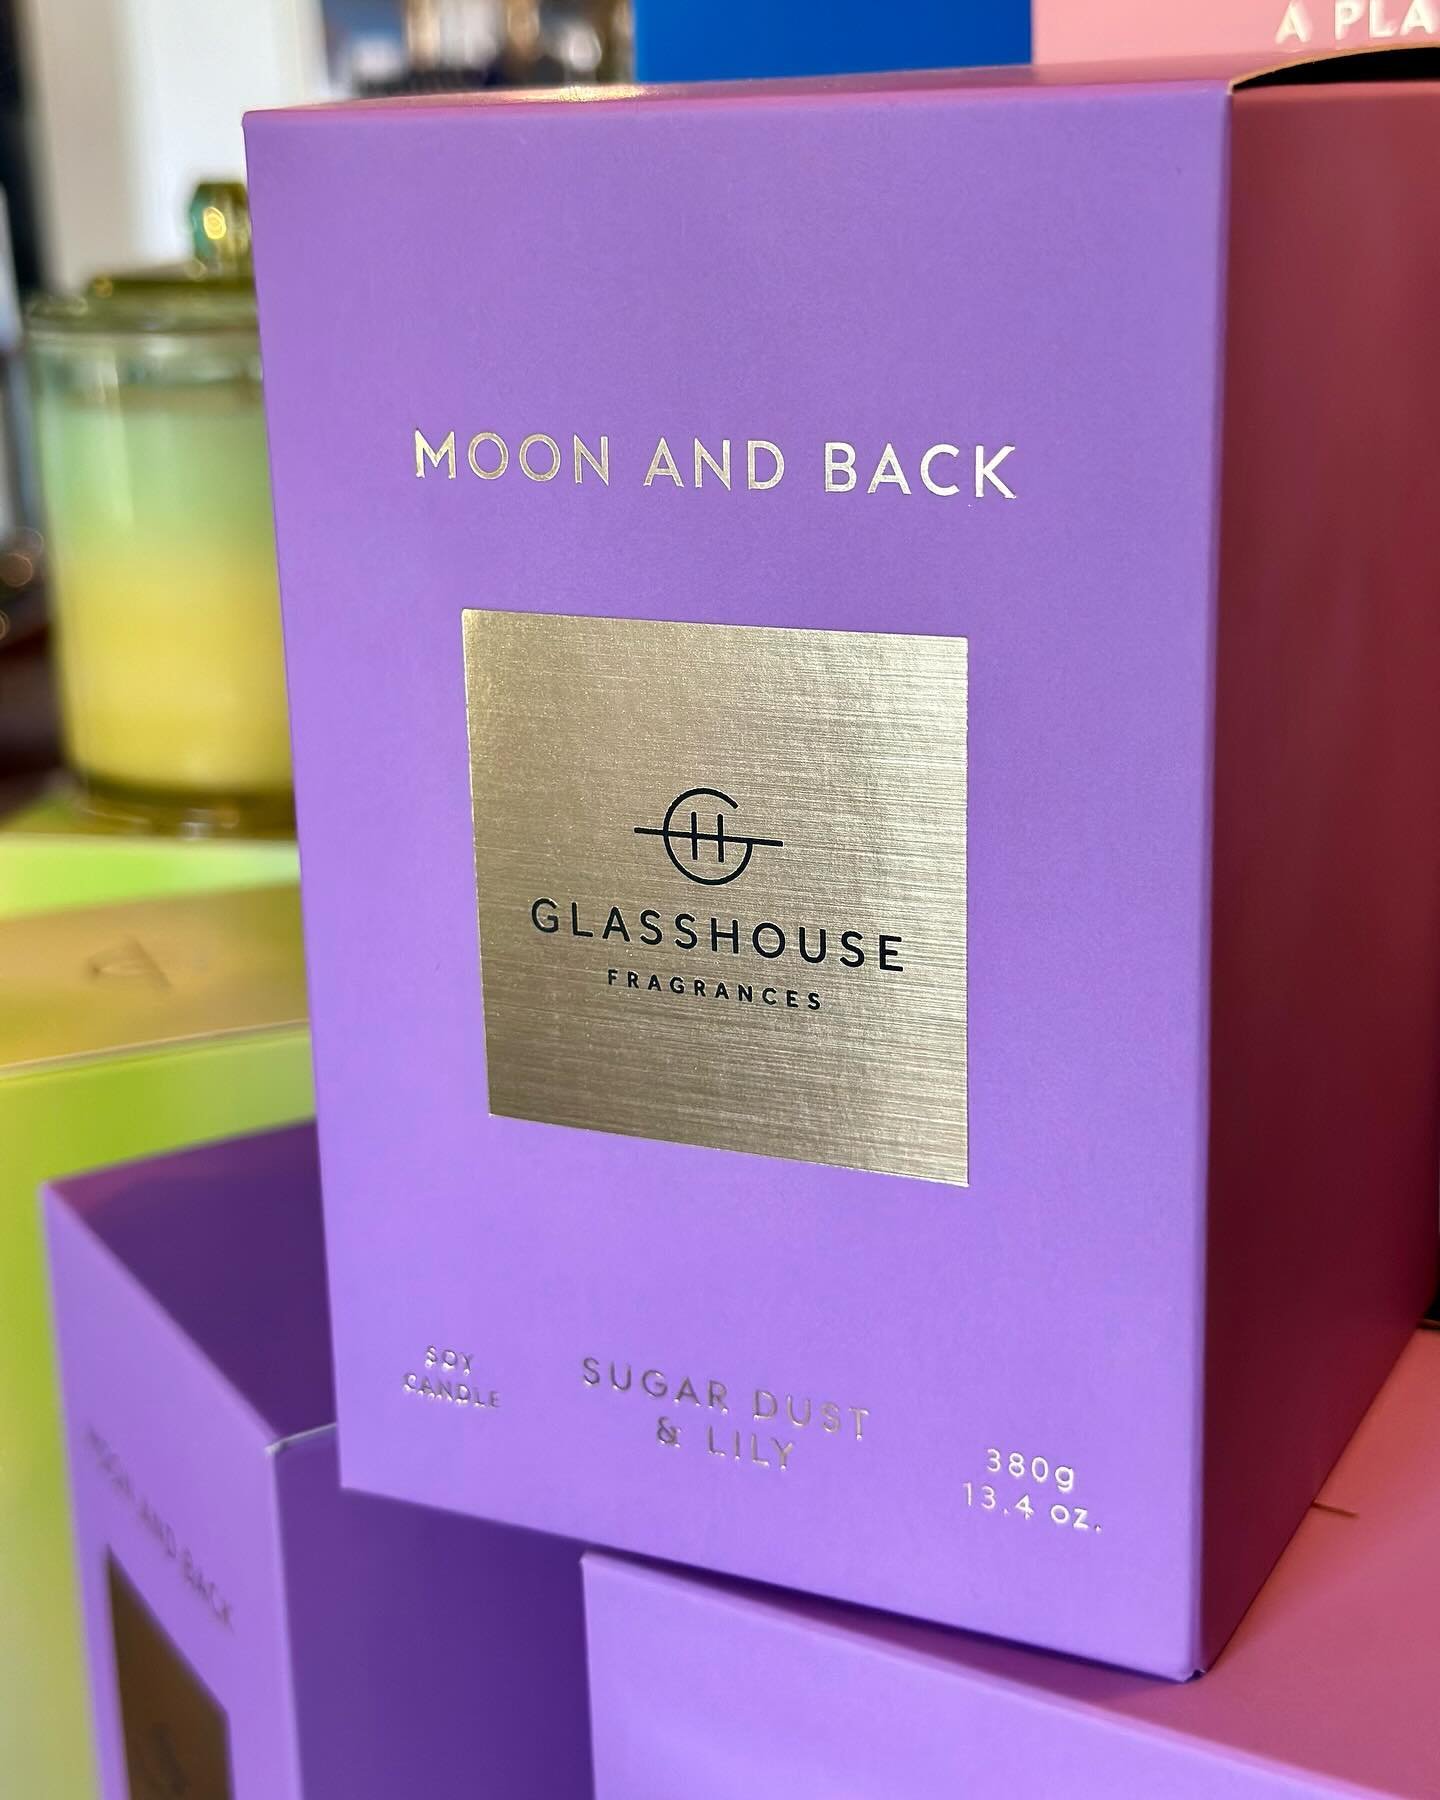 Show Mom that you love her to the moon and back!✨

We have the perfect combo for Mother&rsquo;s Day:

The &ldquo;Moon and Back&rdquo; candle by Glass House will fill her home with a luxurious scent that evokes warmth, comfort and love.
 
Unique cards